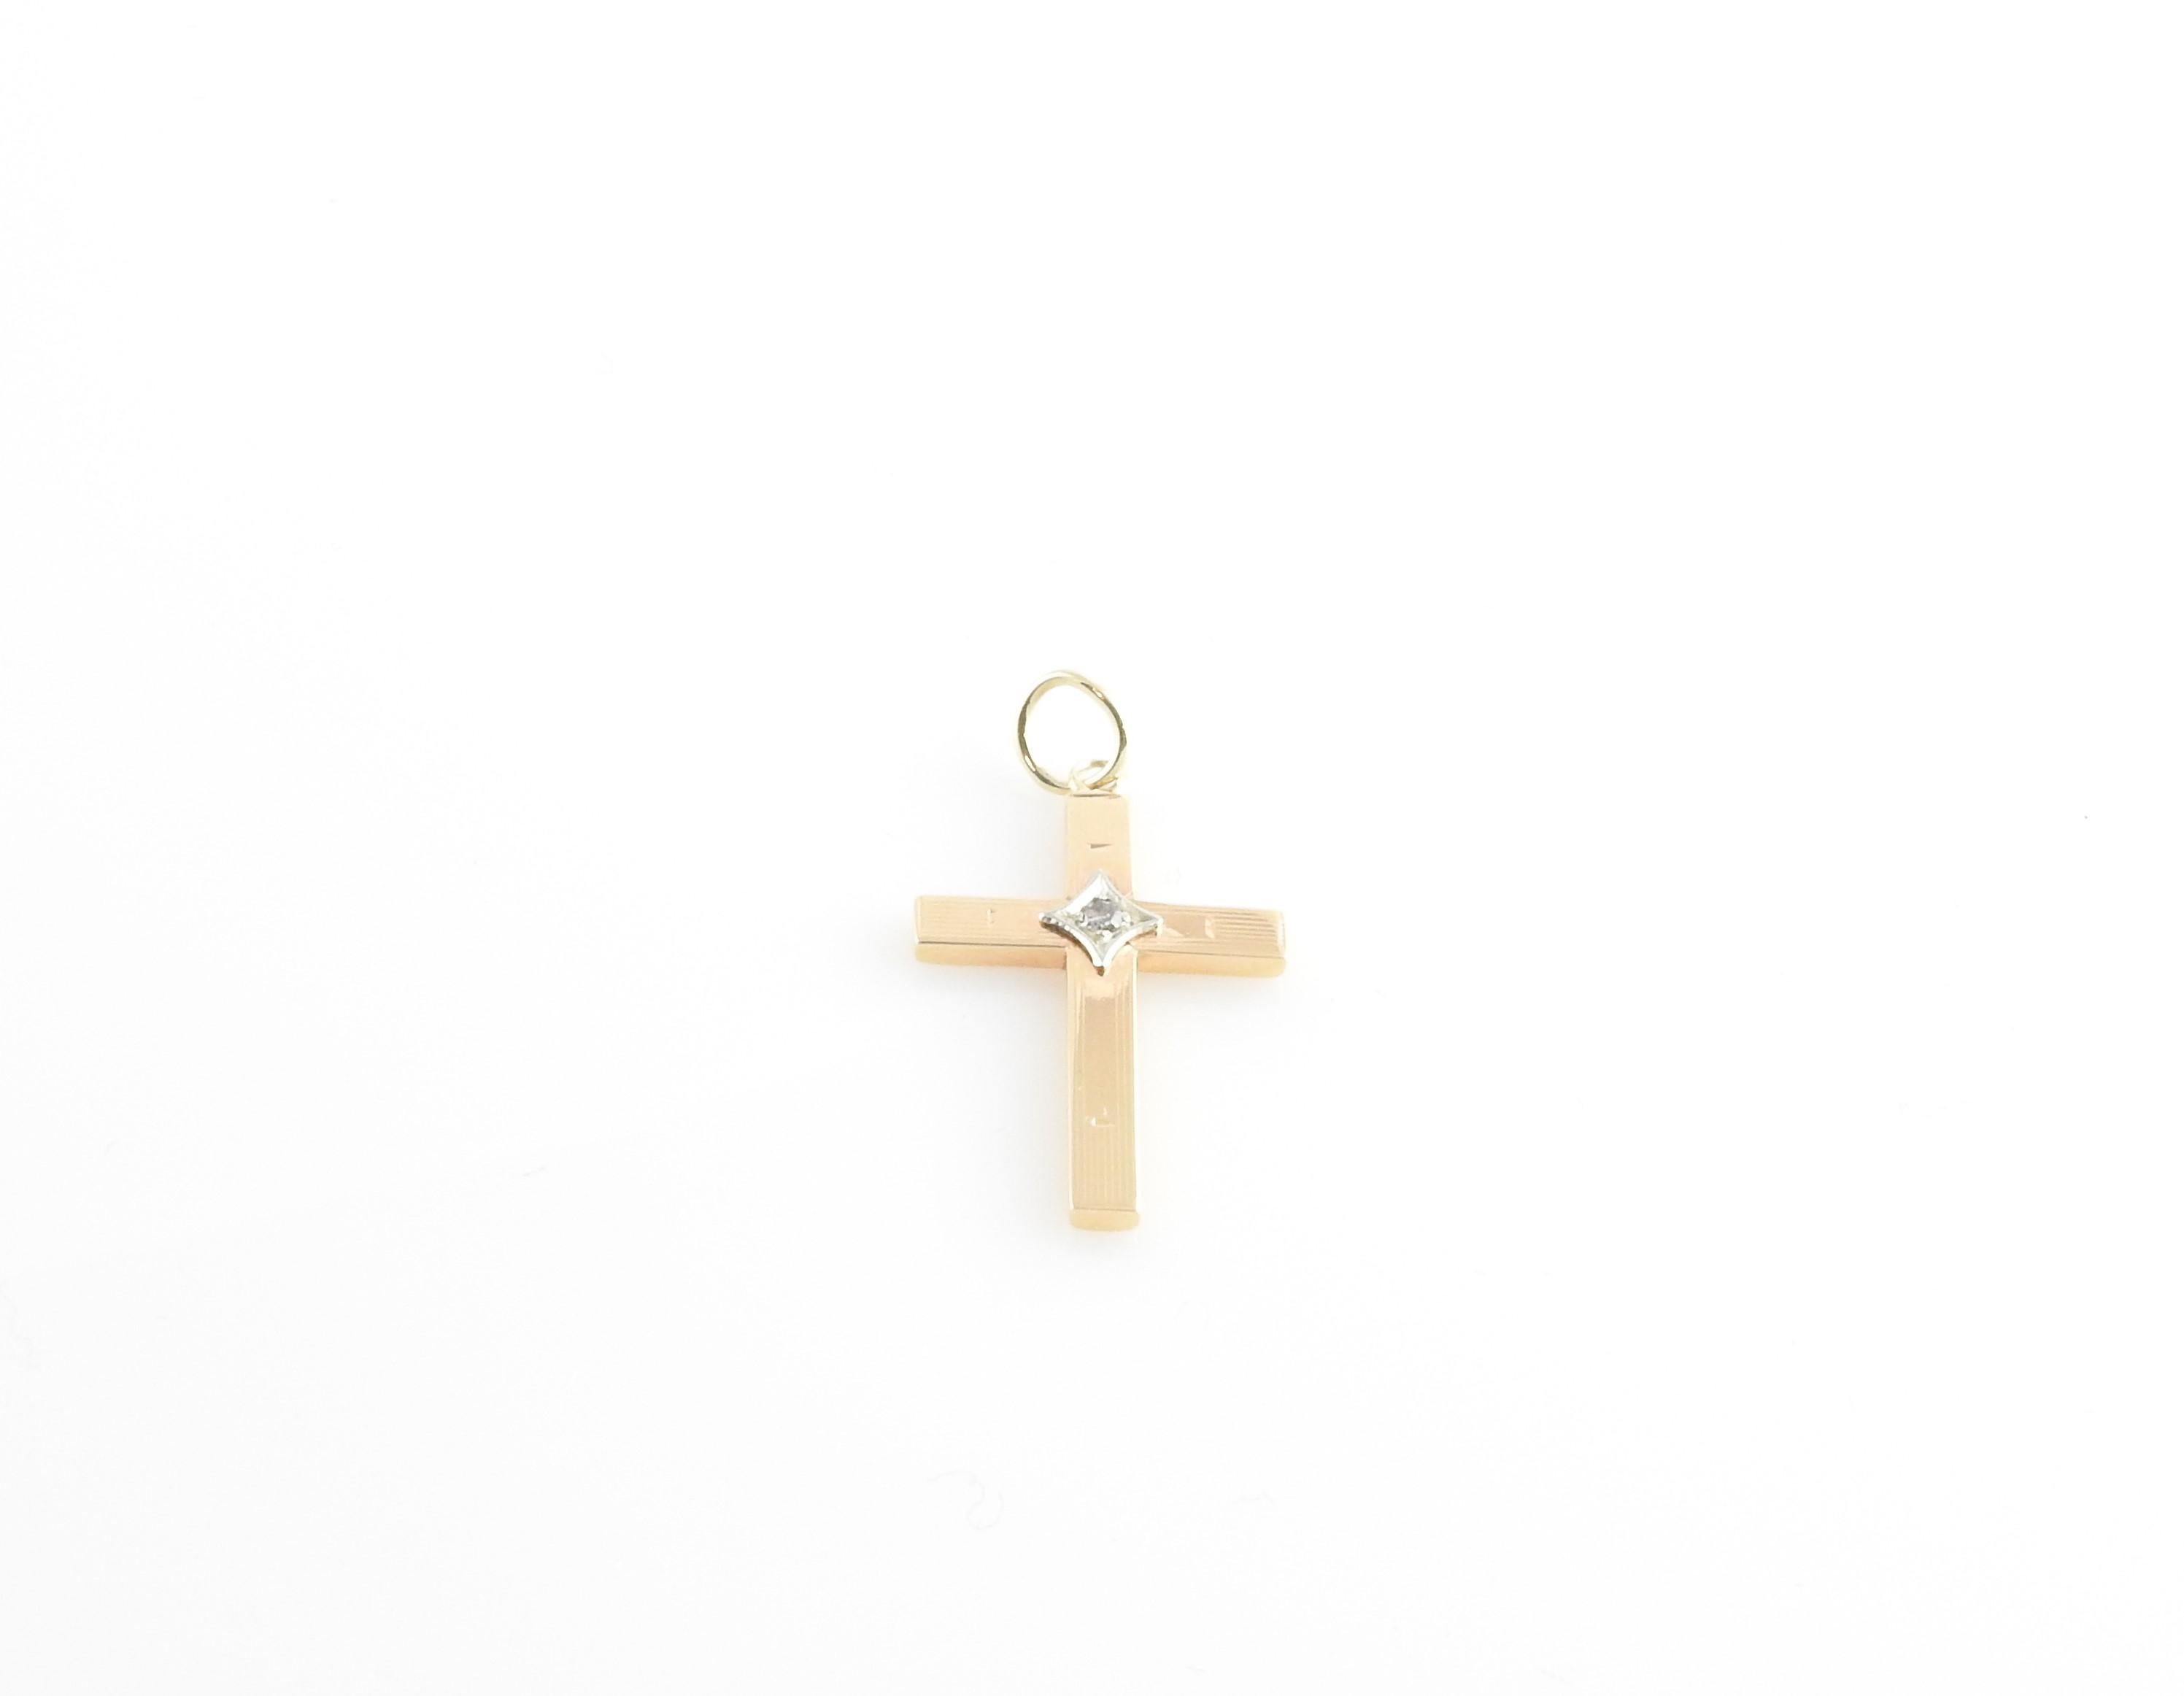 Vintage 14 Karat Yellow Gold and Diamond Cross Pendant

This lovely 14K Yellow gold cross pendant features one round single cut diamond set in beautifully detailed 14K white gold.

Approximate total diamond weight: .02 ct.

Diamond color: I

Diamond